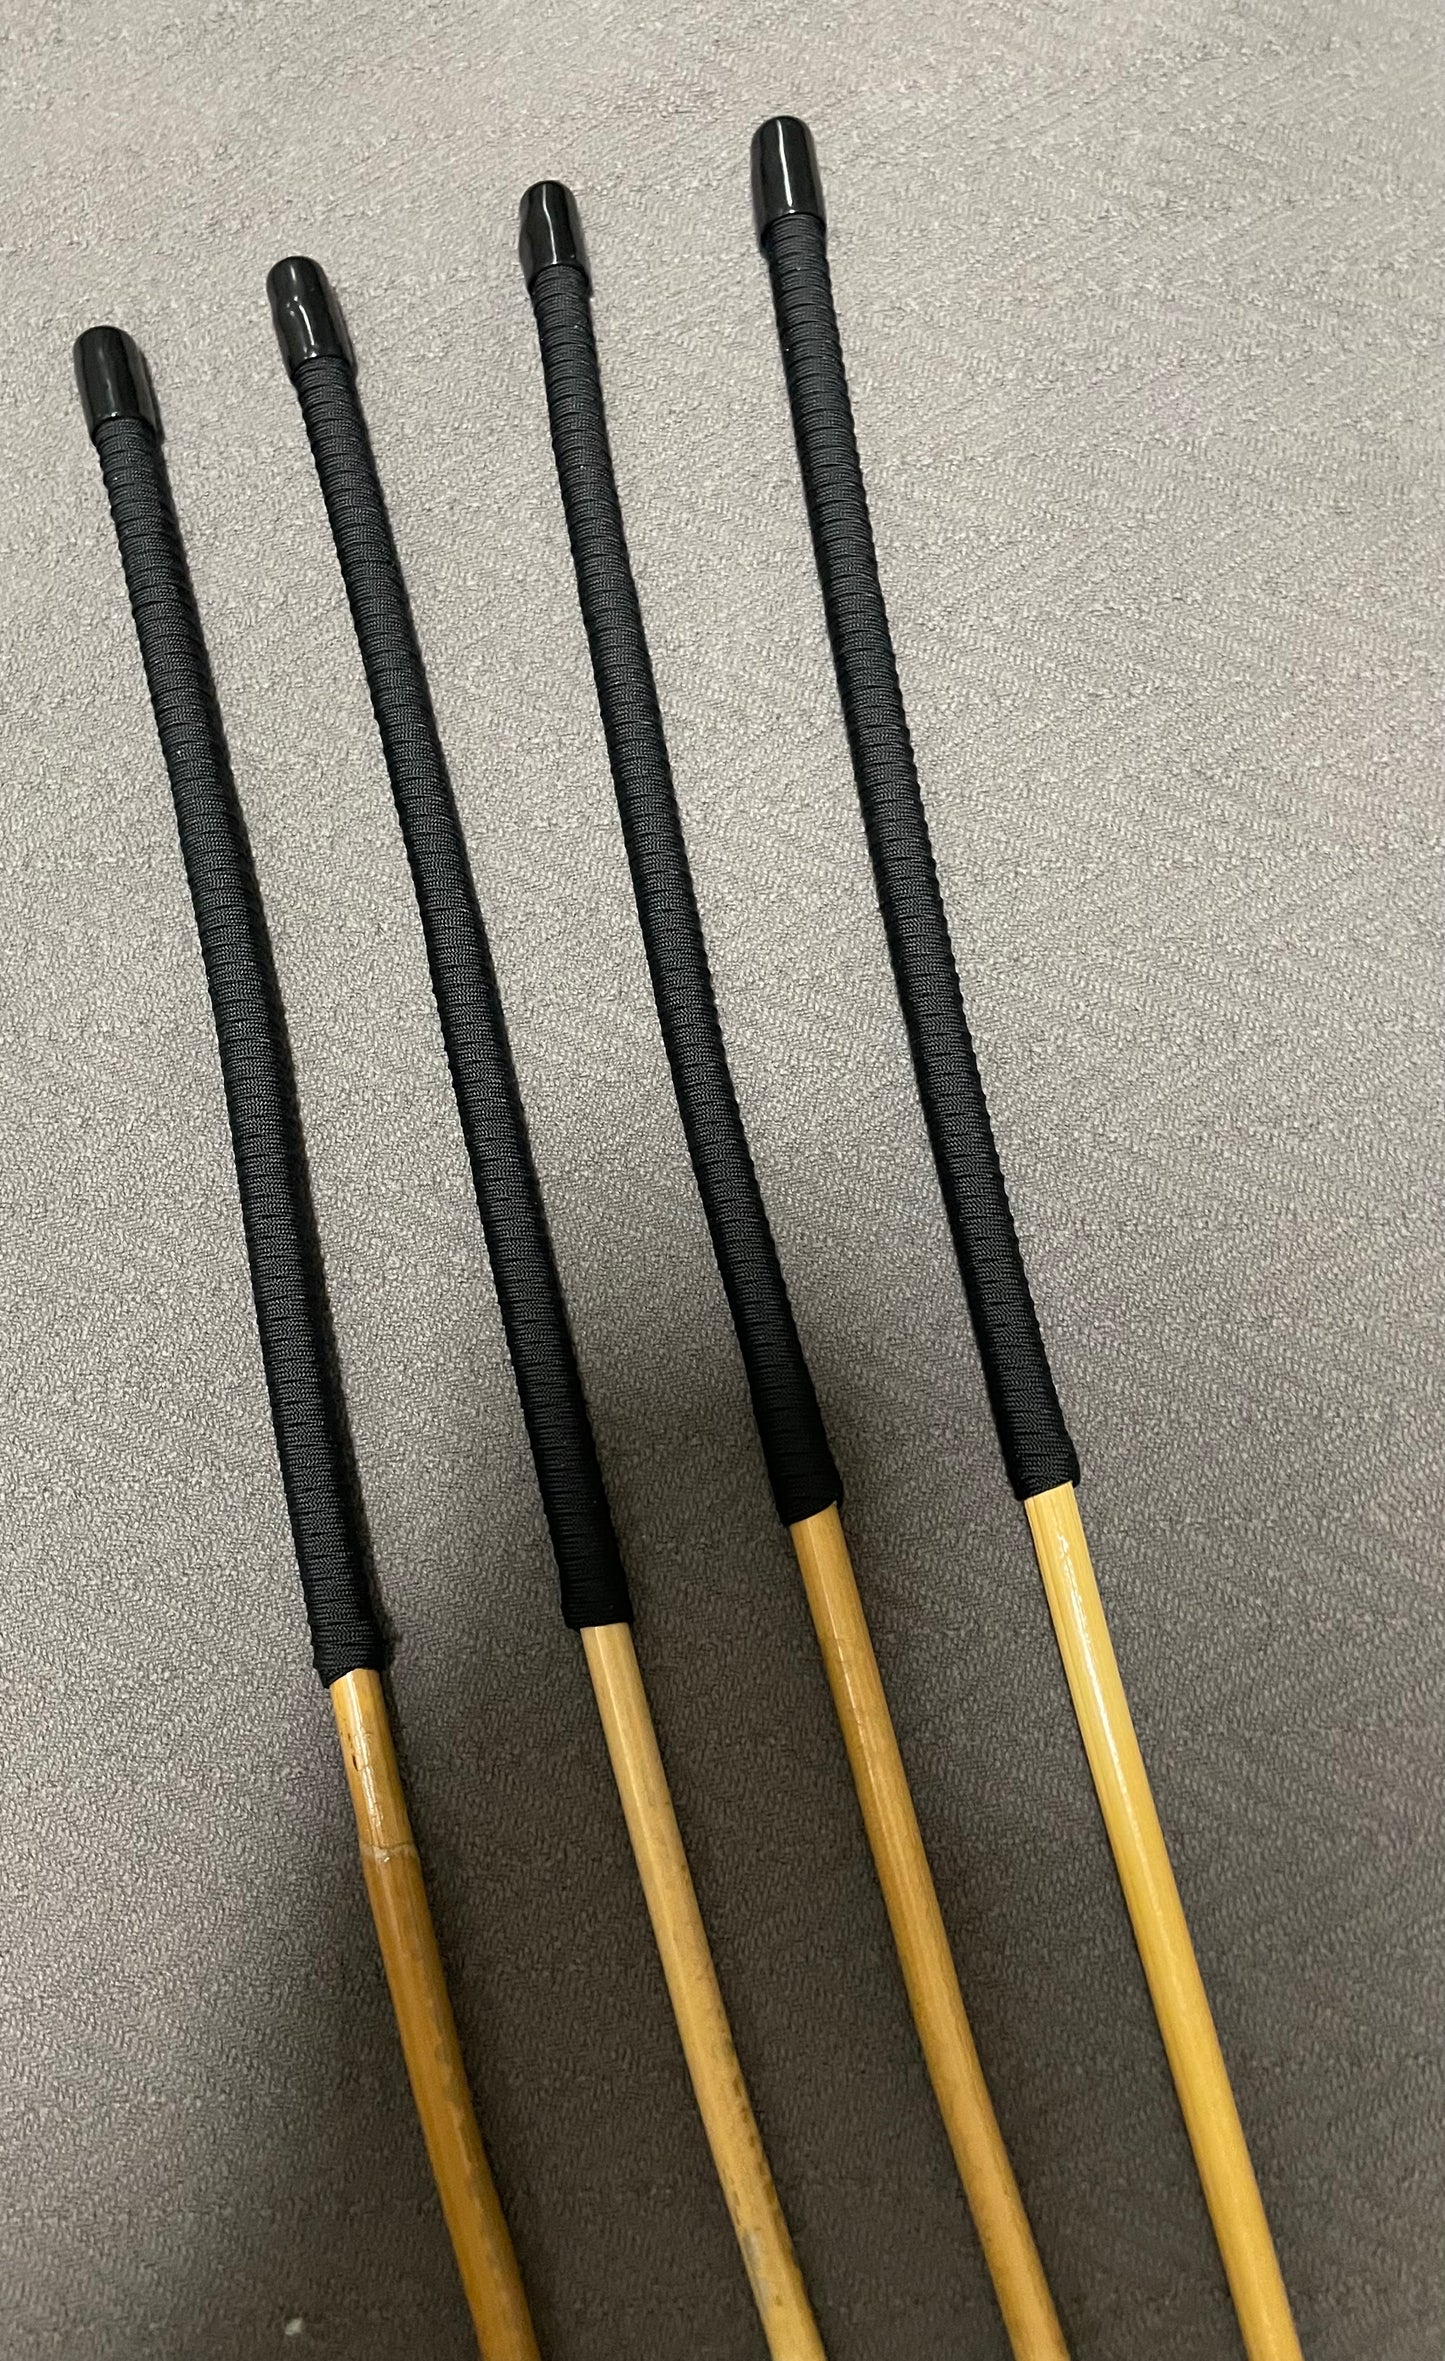 Set of 4 Reformatory Senior Kooboo Rattan Punishment canes  with Black Paracord Handles - 83 to 85 cms L & 10 - 10.5 mm D - Englishvice Canes